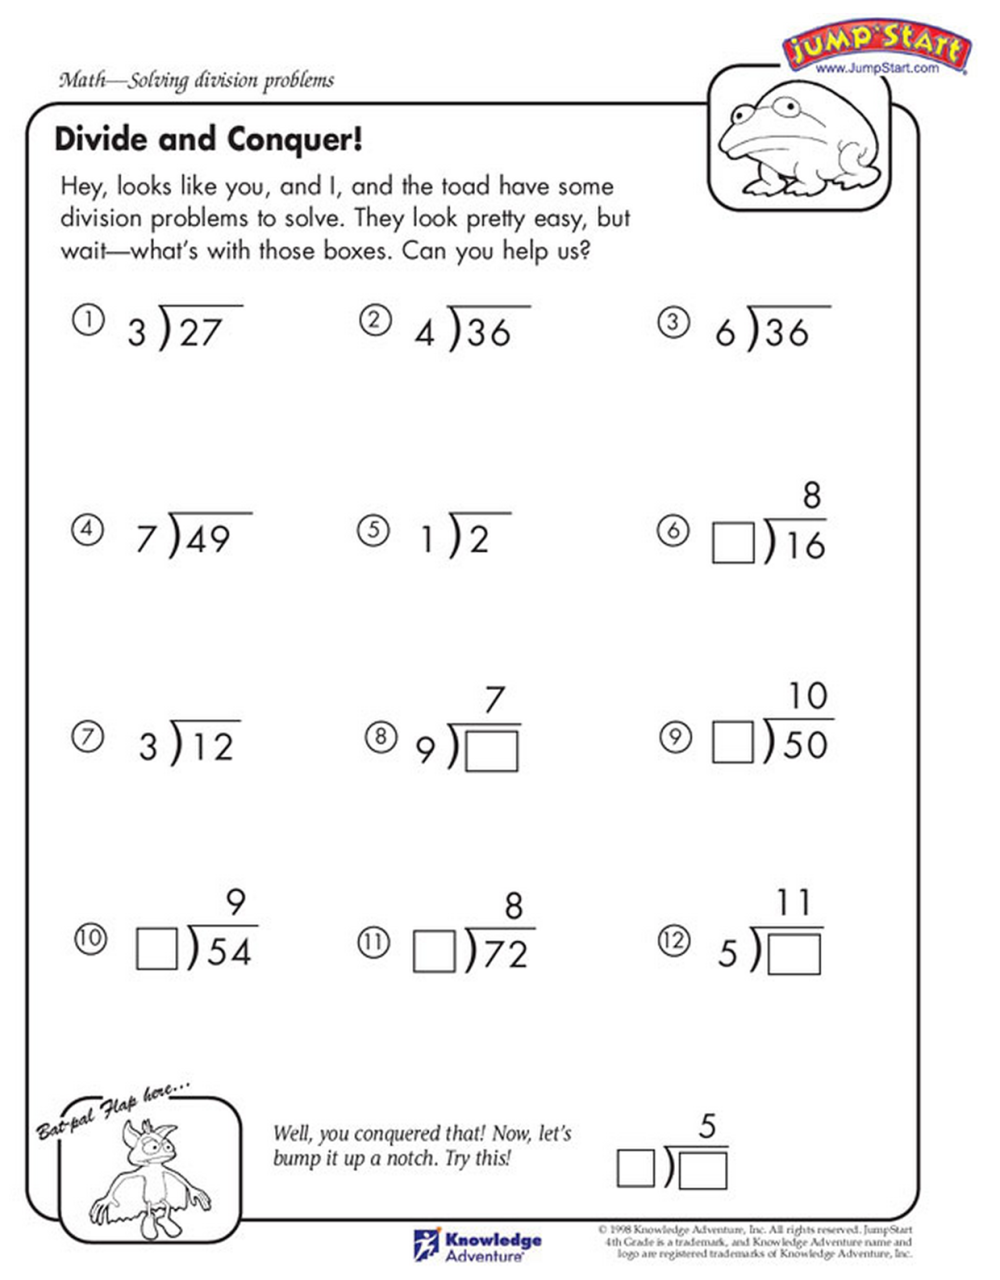 Help mister toad solve these division problems! 4th grade math